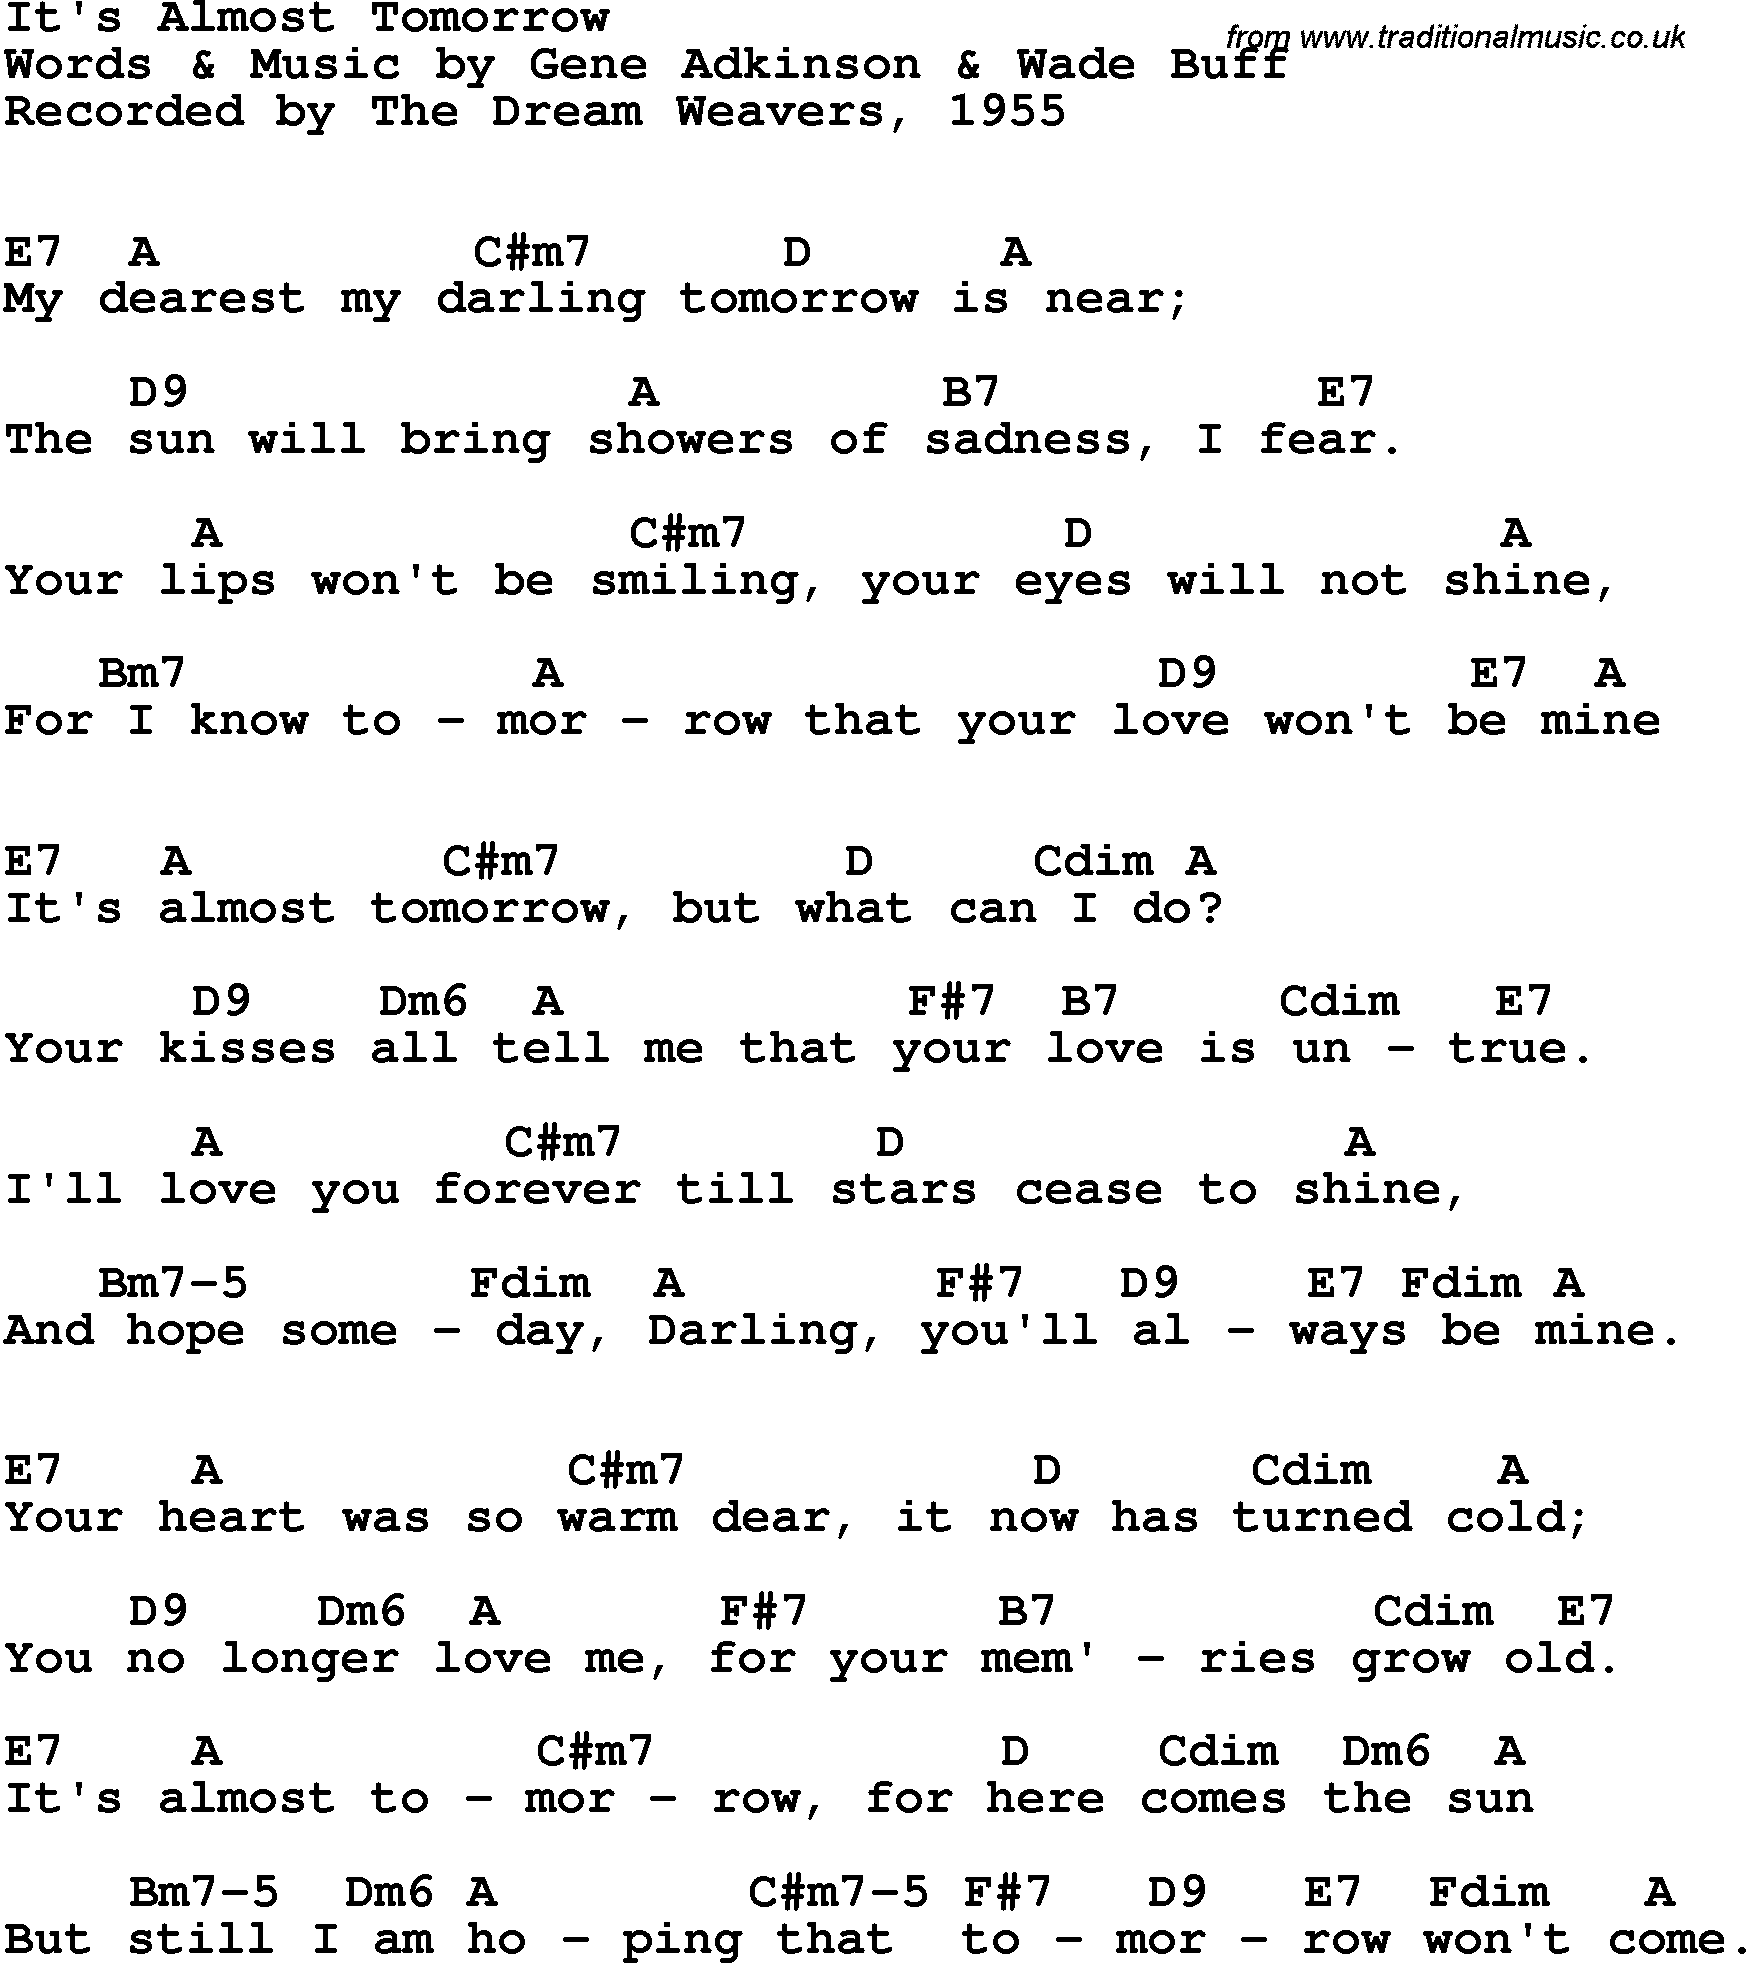 Song Lyrics with guitar chords for It's Almost Tomorrow - The Dream Weavers, 1955